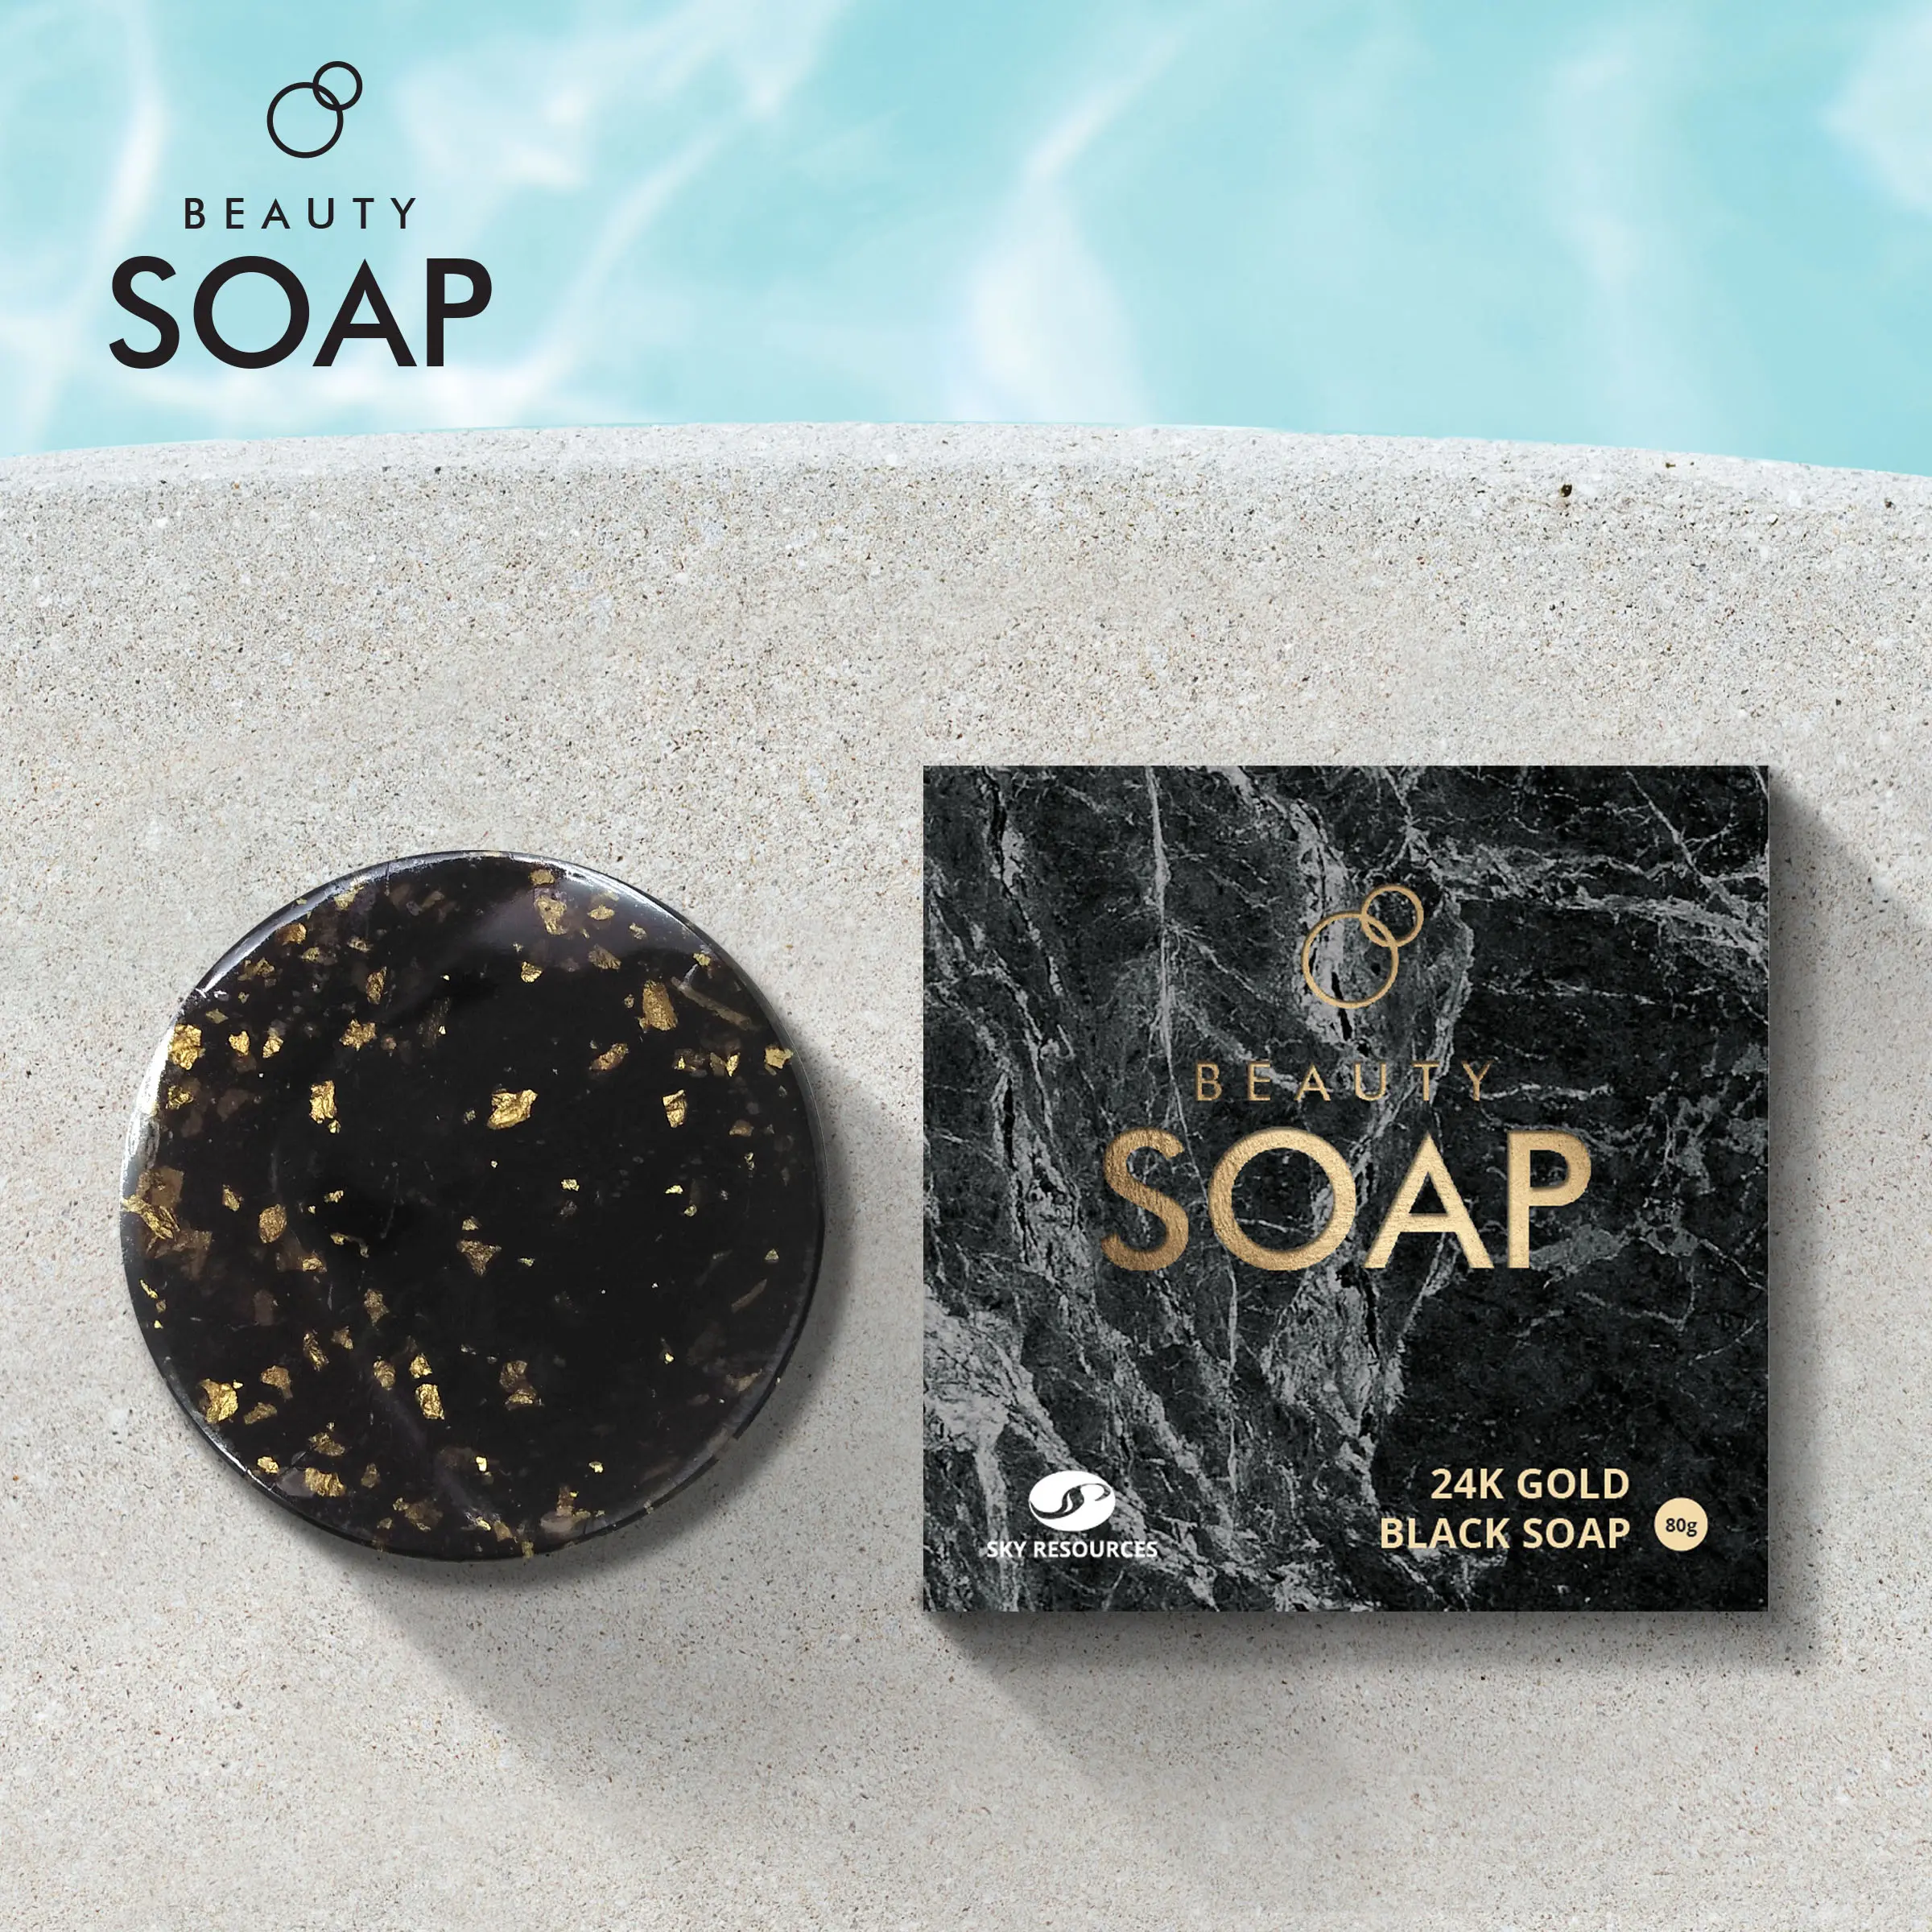 Luxury Magical Skin Moisturizing with mint and Tea Tree Oil 24K Gold Black beauty bath soap Private label